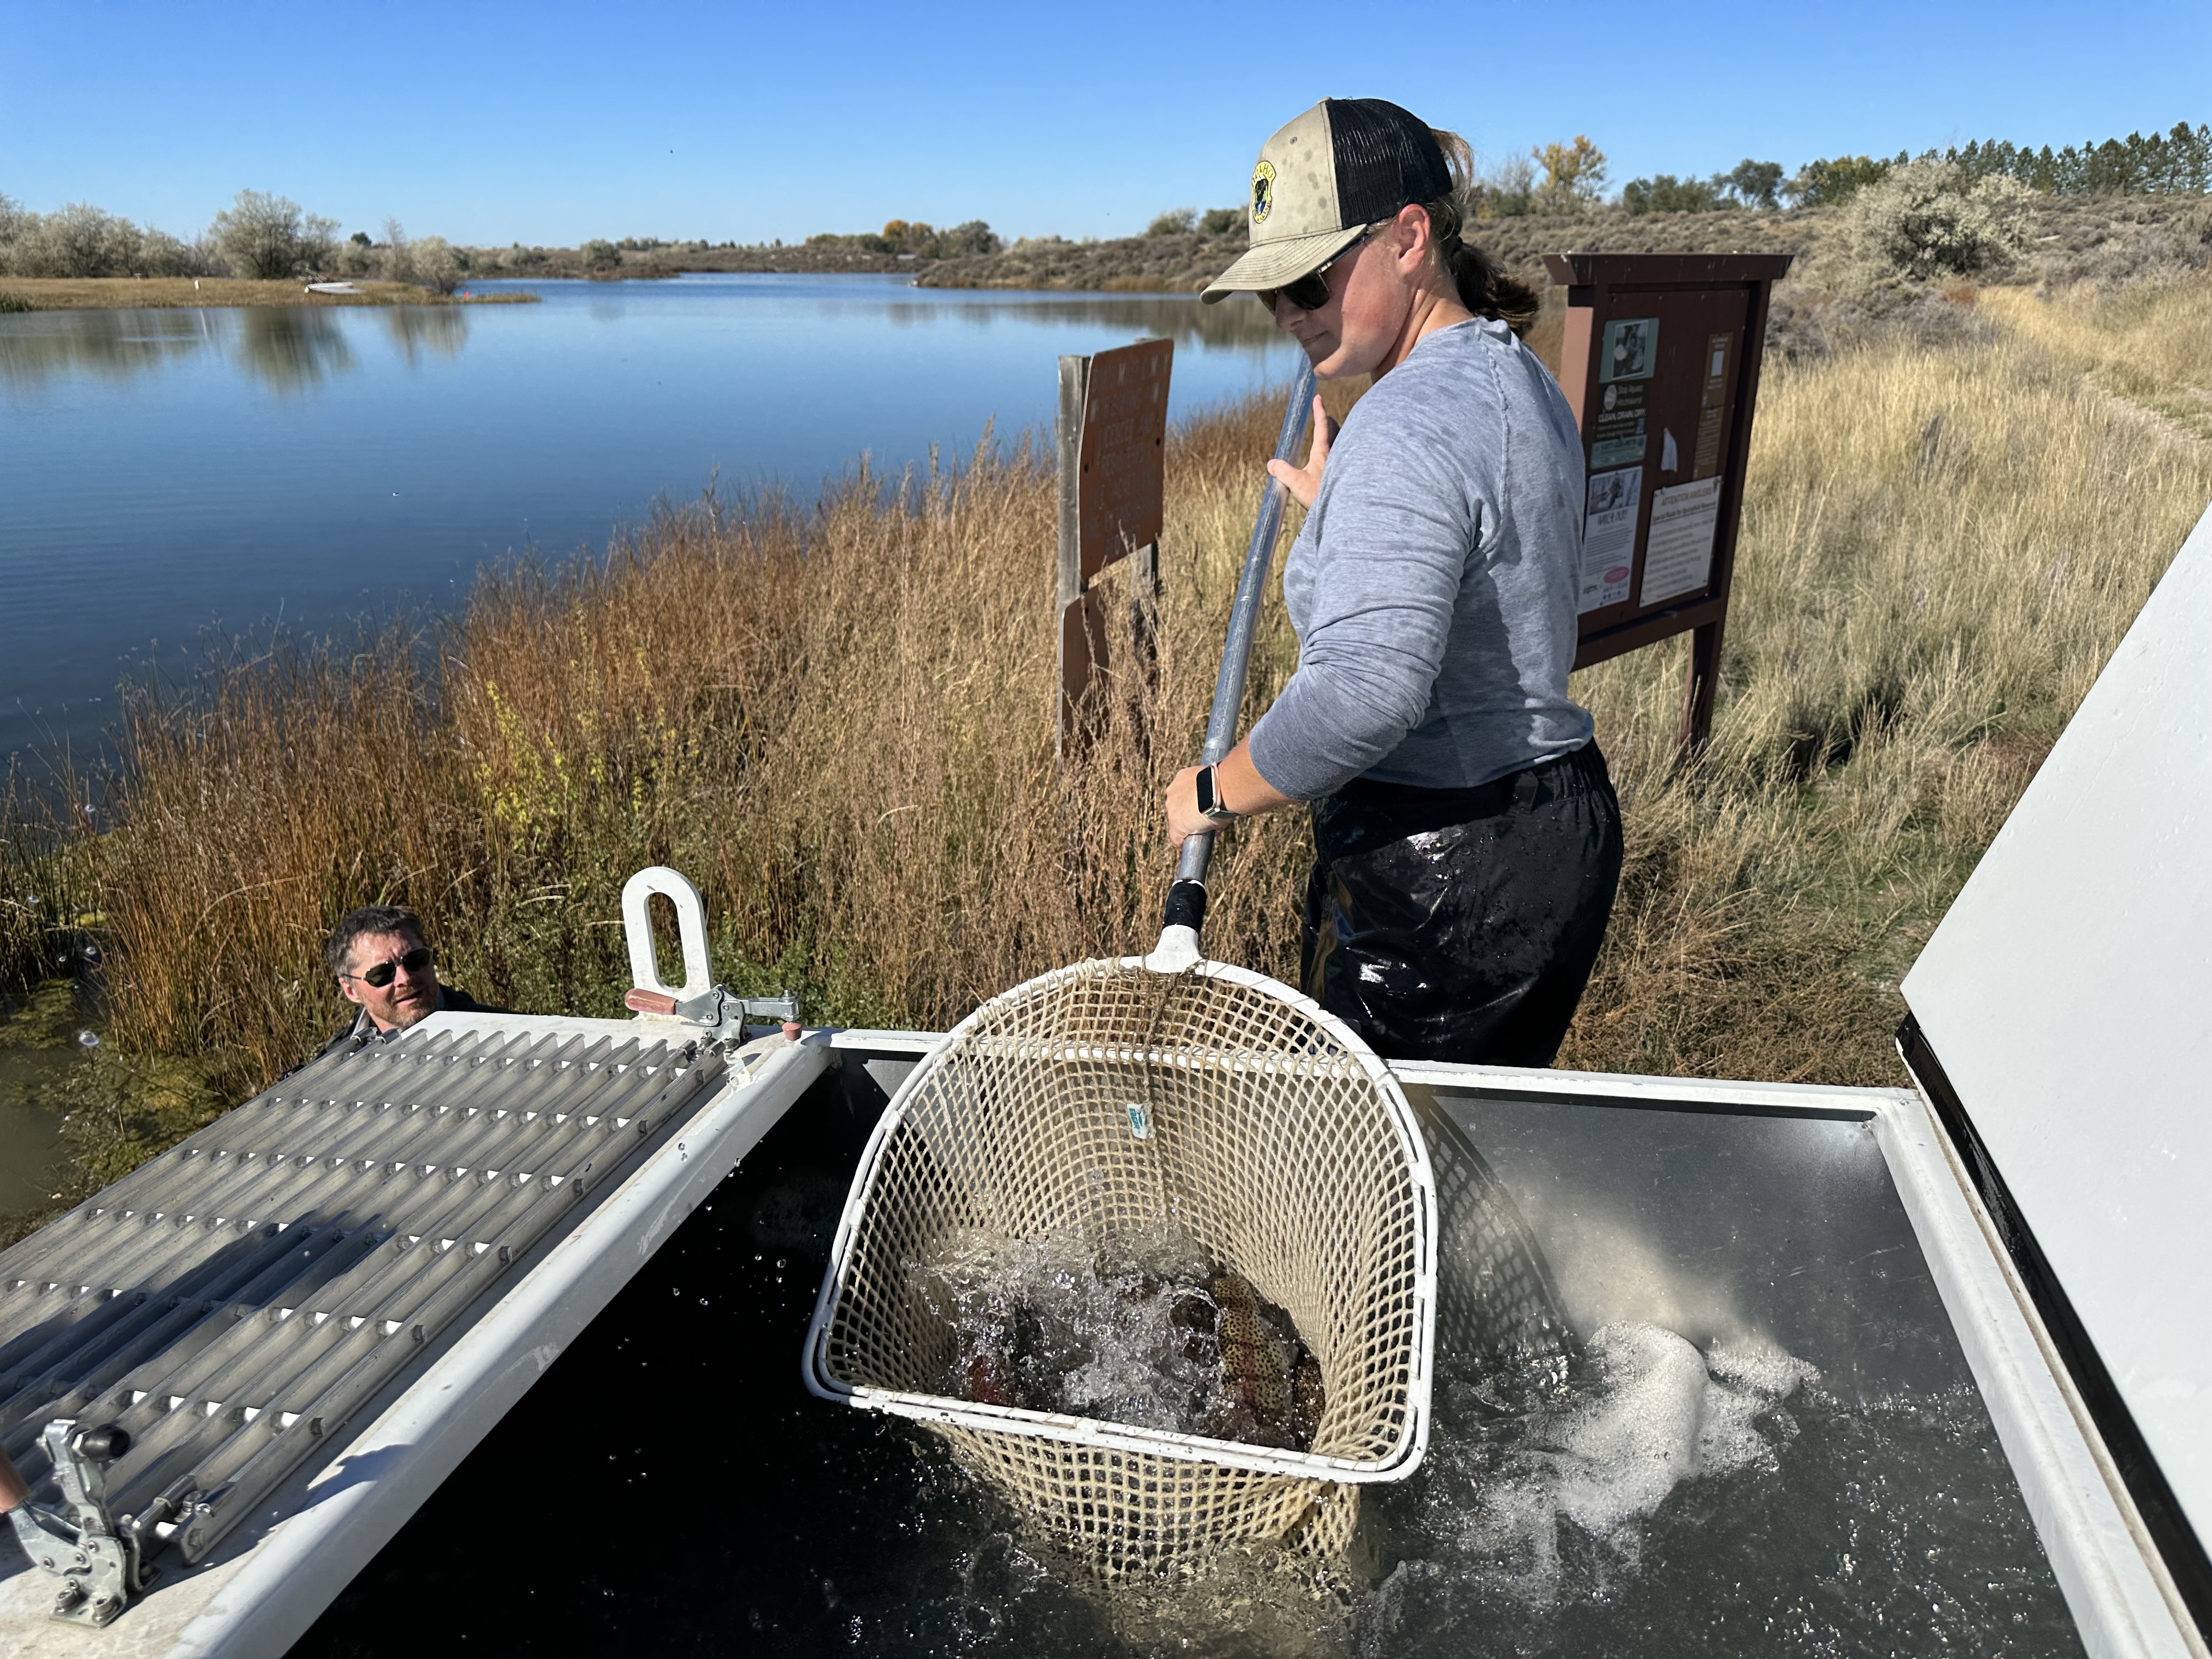 A woman netting large rainbow trout out of a tank on a fish hatchery truck with a blue reservoir in the background.